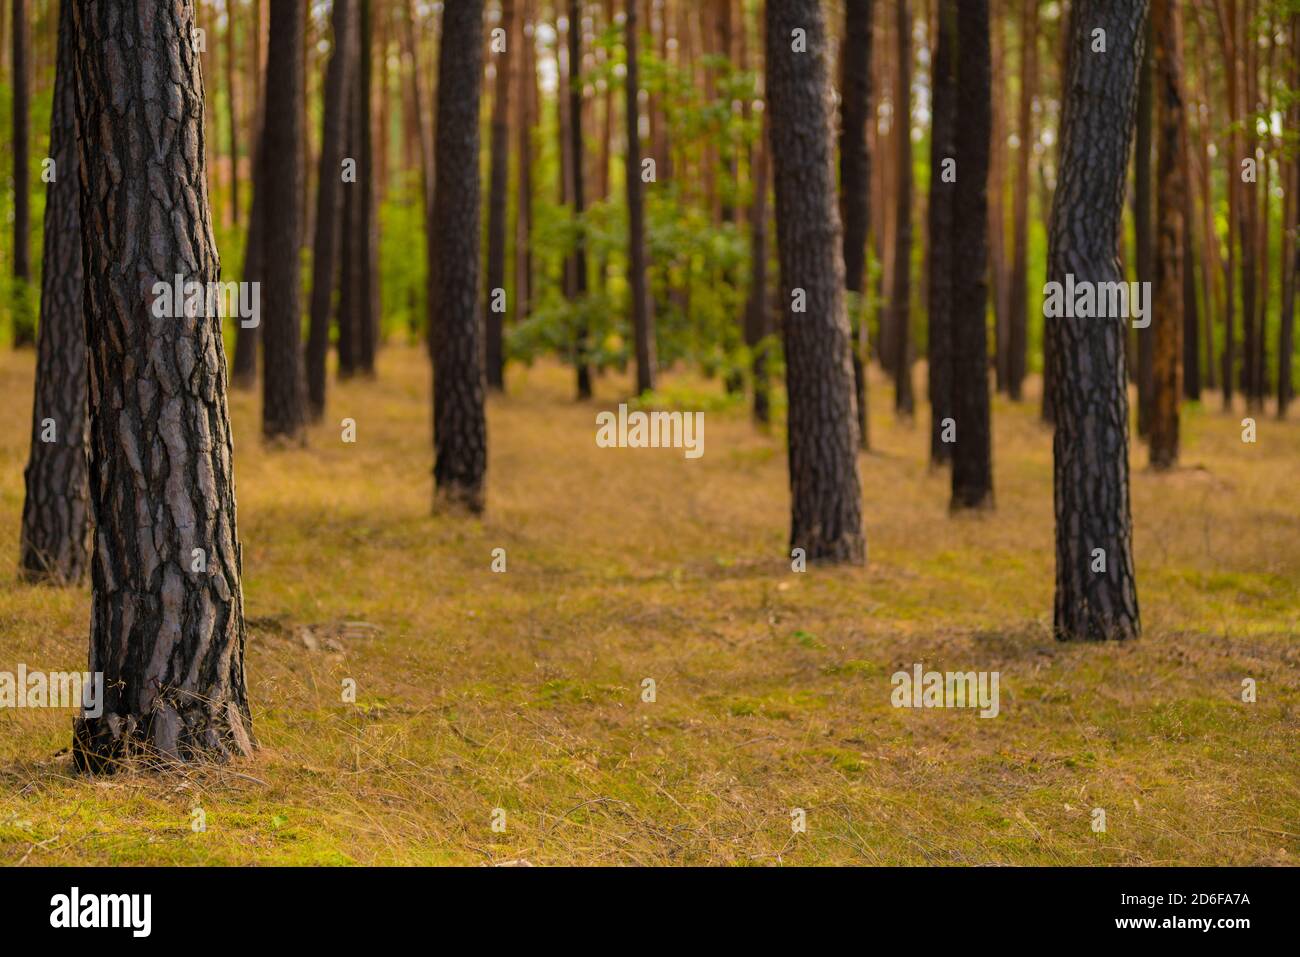 Pine forest, in the background deciduous trees, selective sharpness, sharpness in the foreground, background blurred Stock Photo